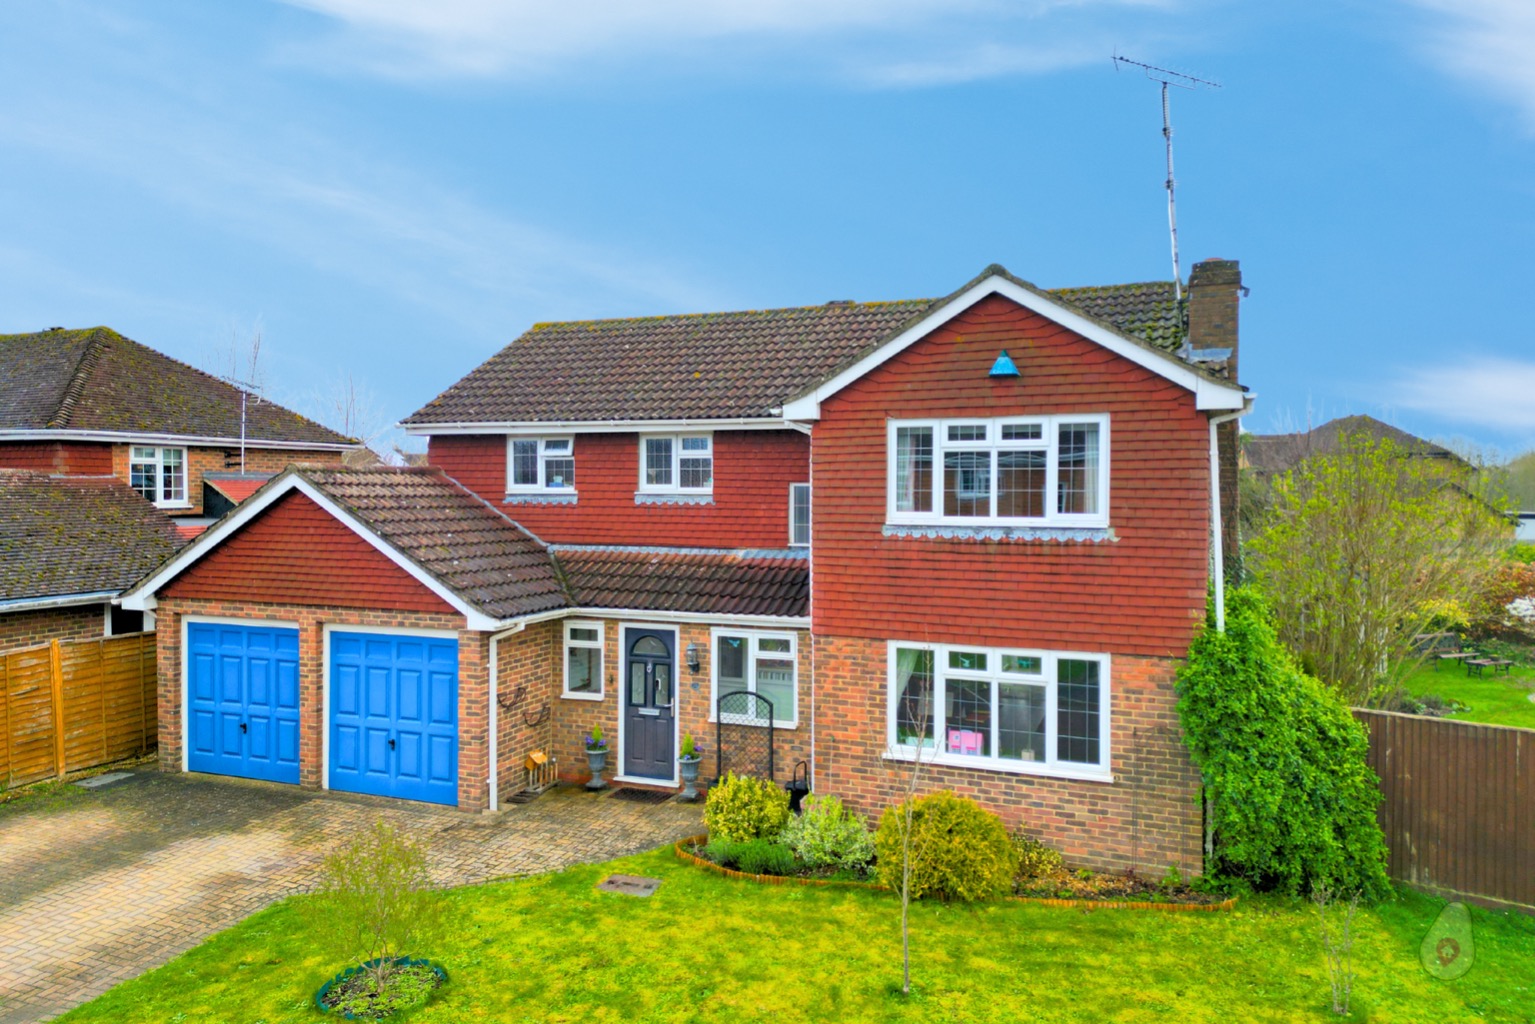 4 bed detached house for sale in Swanmore Close, Reading - Property Image 1